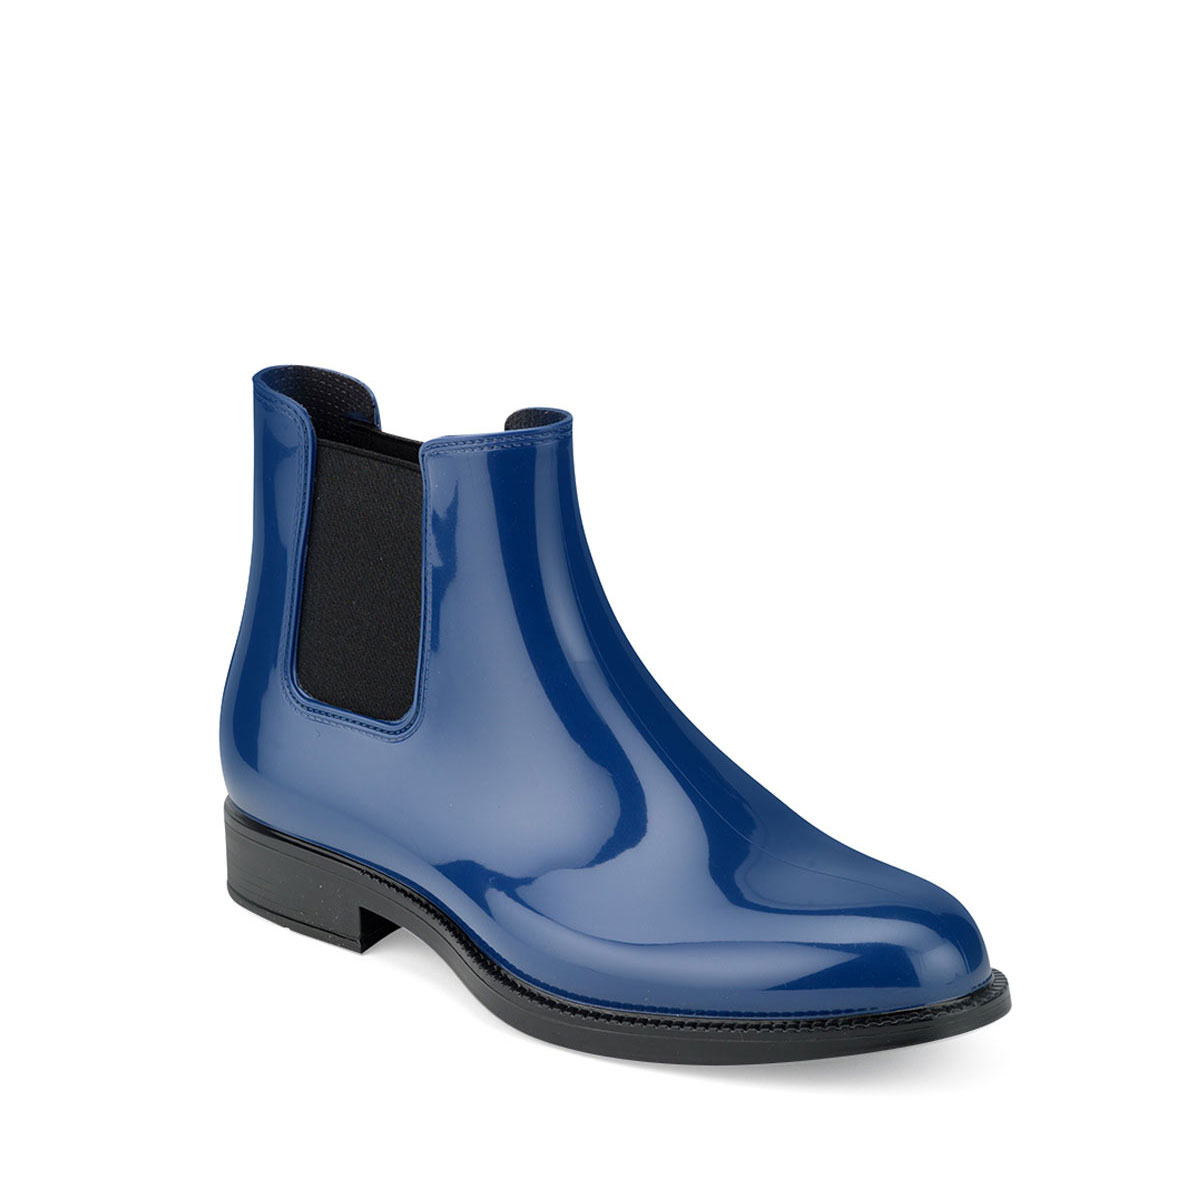 Chelsea boot in bright pvc with elastic band on ankle sides and insole - dark royal colour